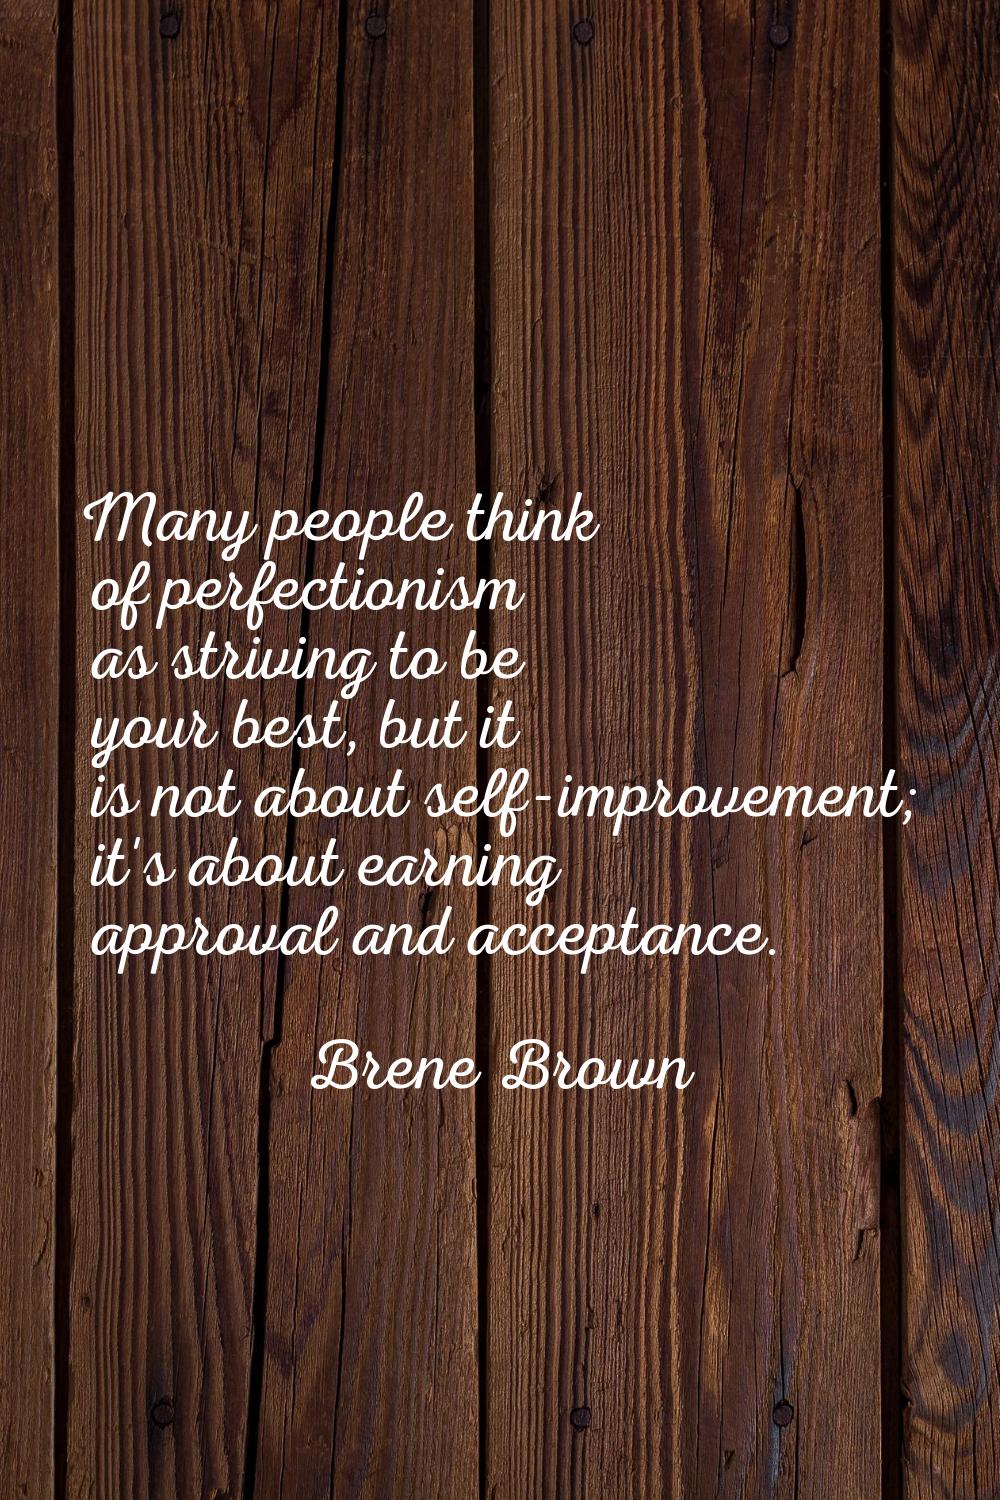 Many people think of perfectionism as striving to be your best, but it is not about self-improvemen